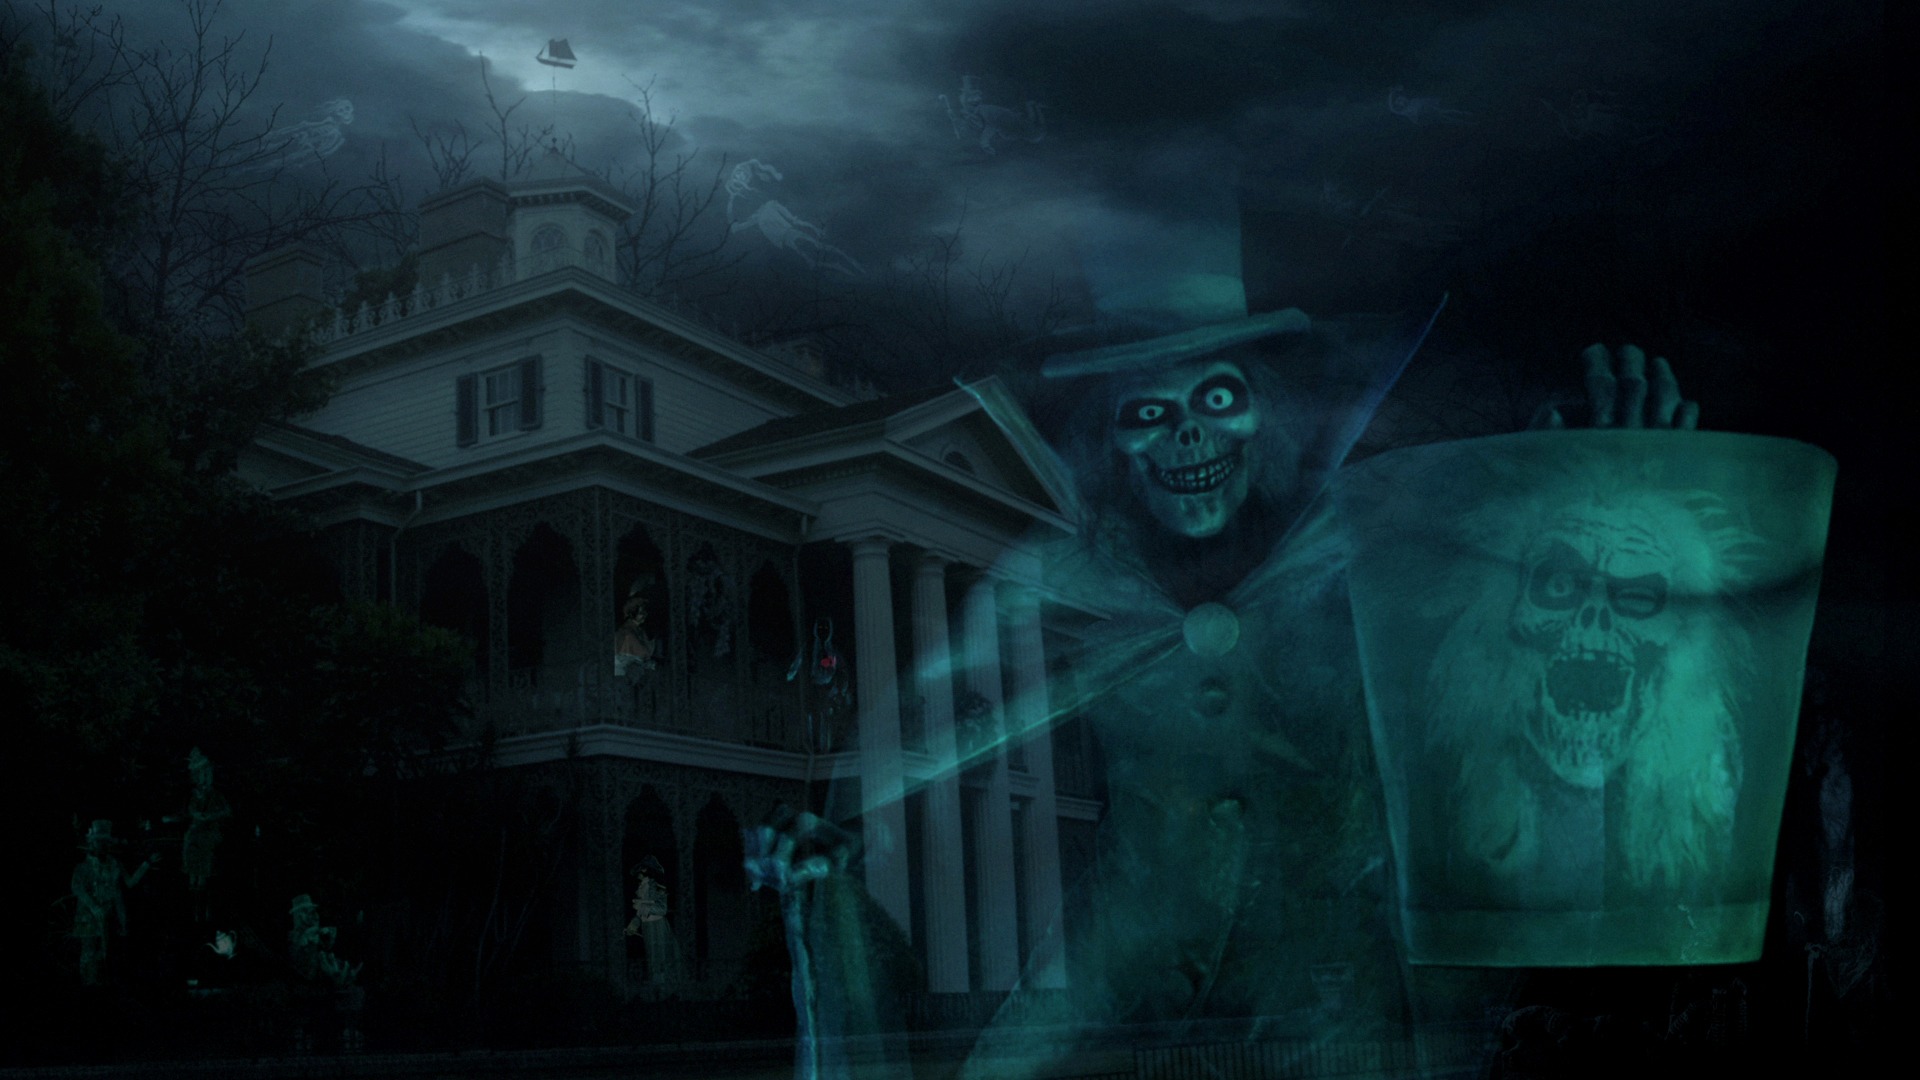 Haunted Mansion Digital Photocollages By Haunt1000 Right Click On